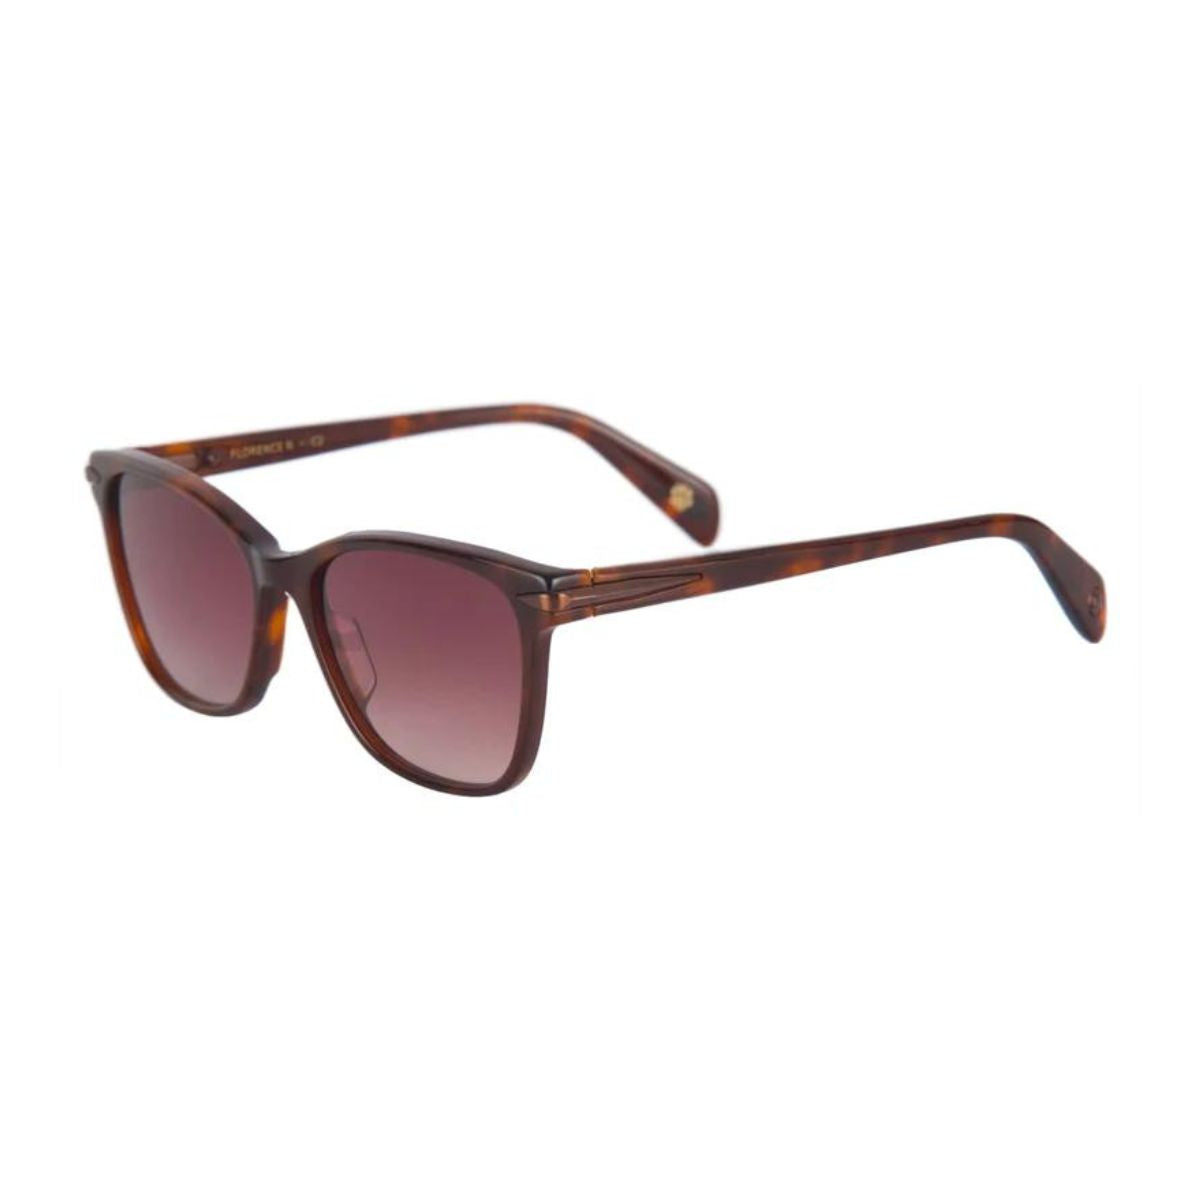 "Buy The Monk Florence N C2 Square Sunglass For Women's At Optorium"